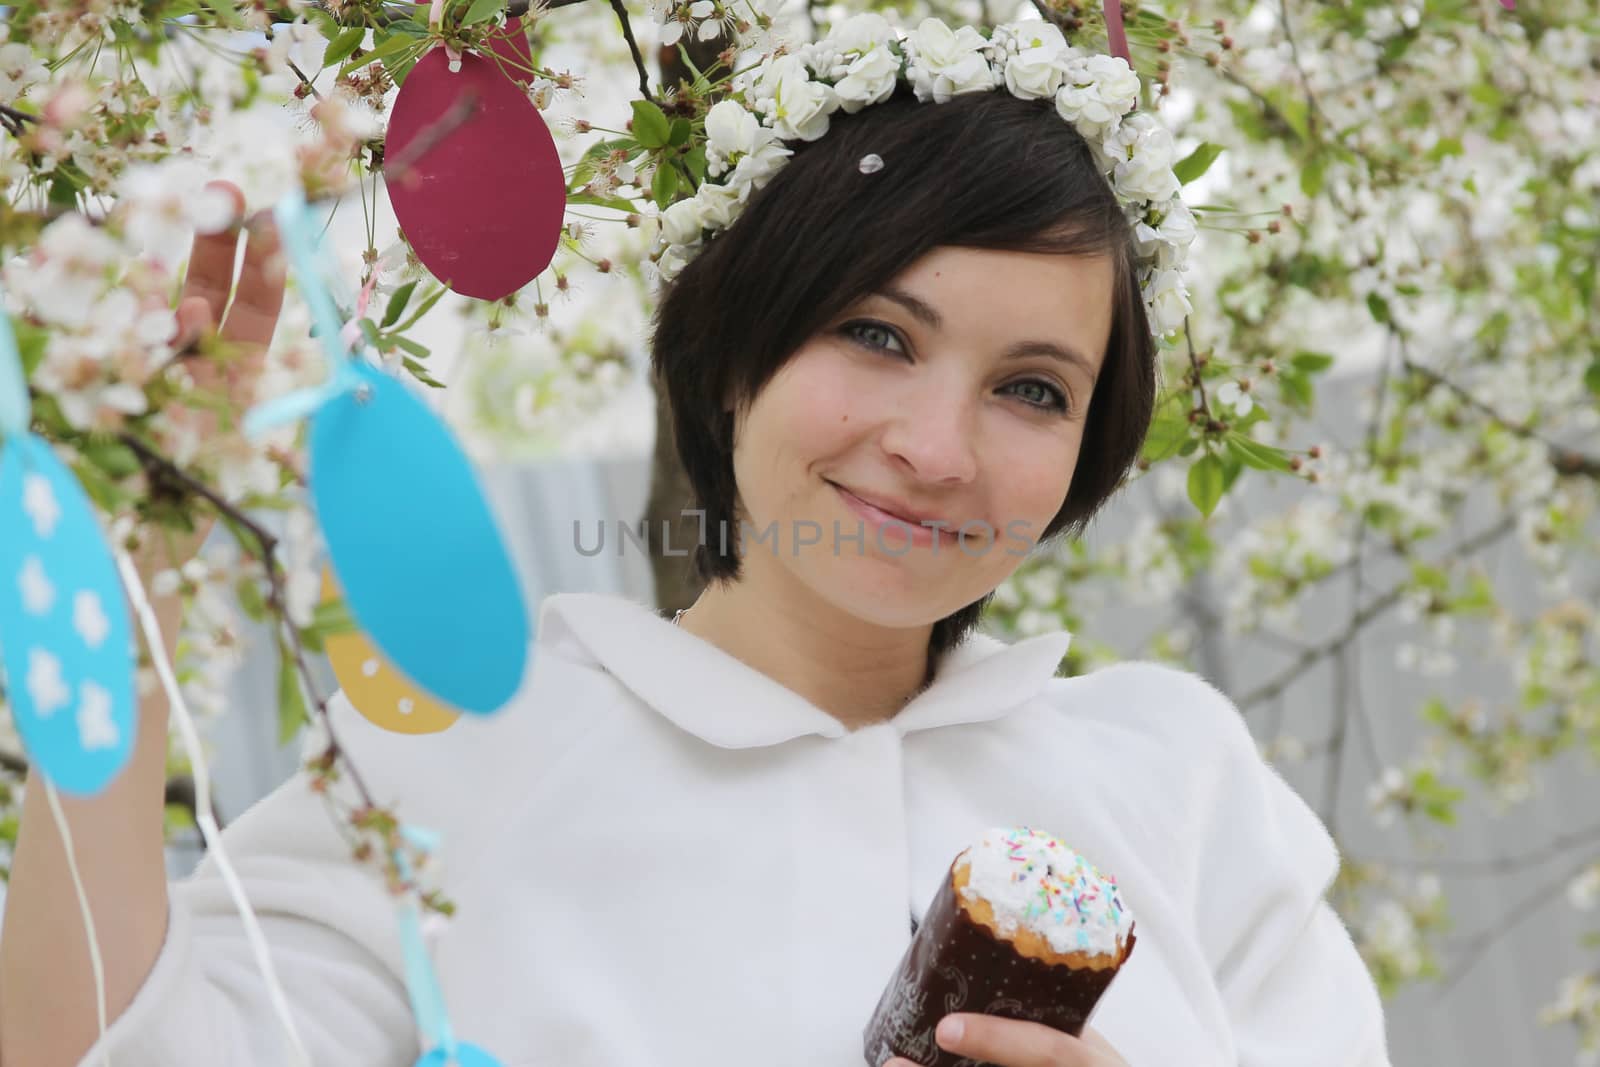 Woman with wreath and Easter cake among spring garden by Angel_a